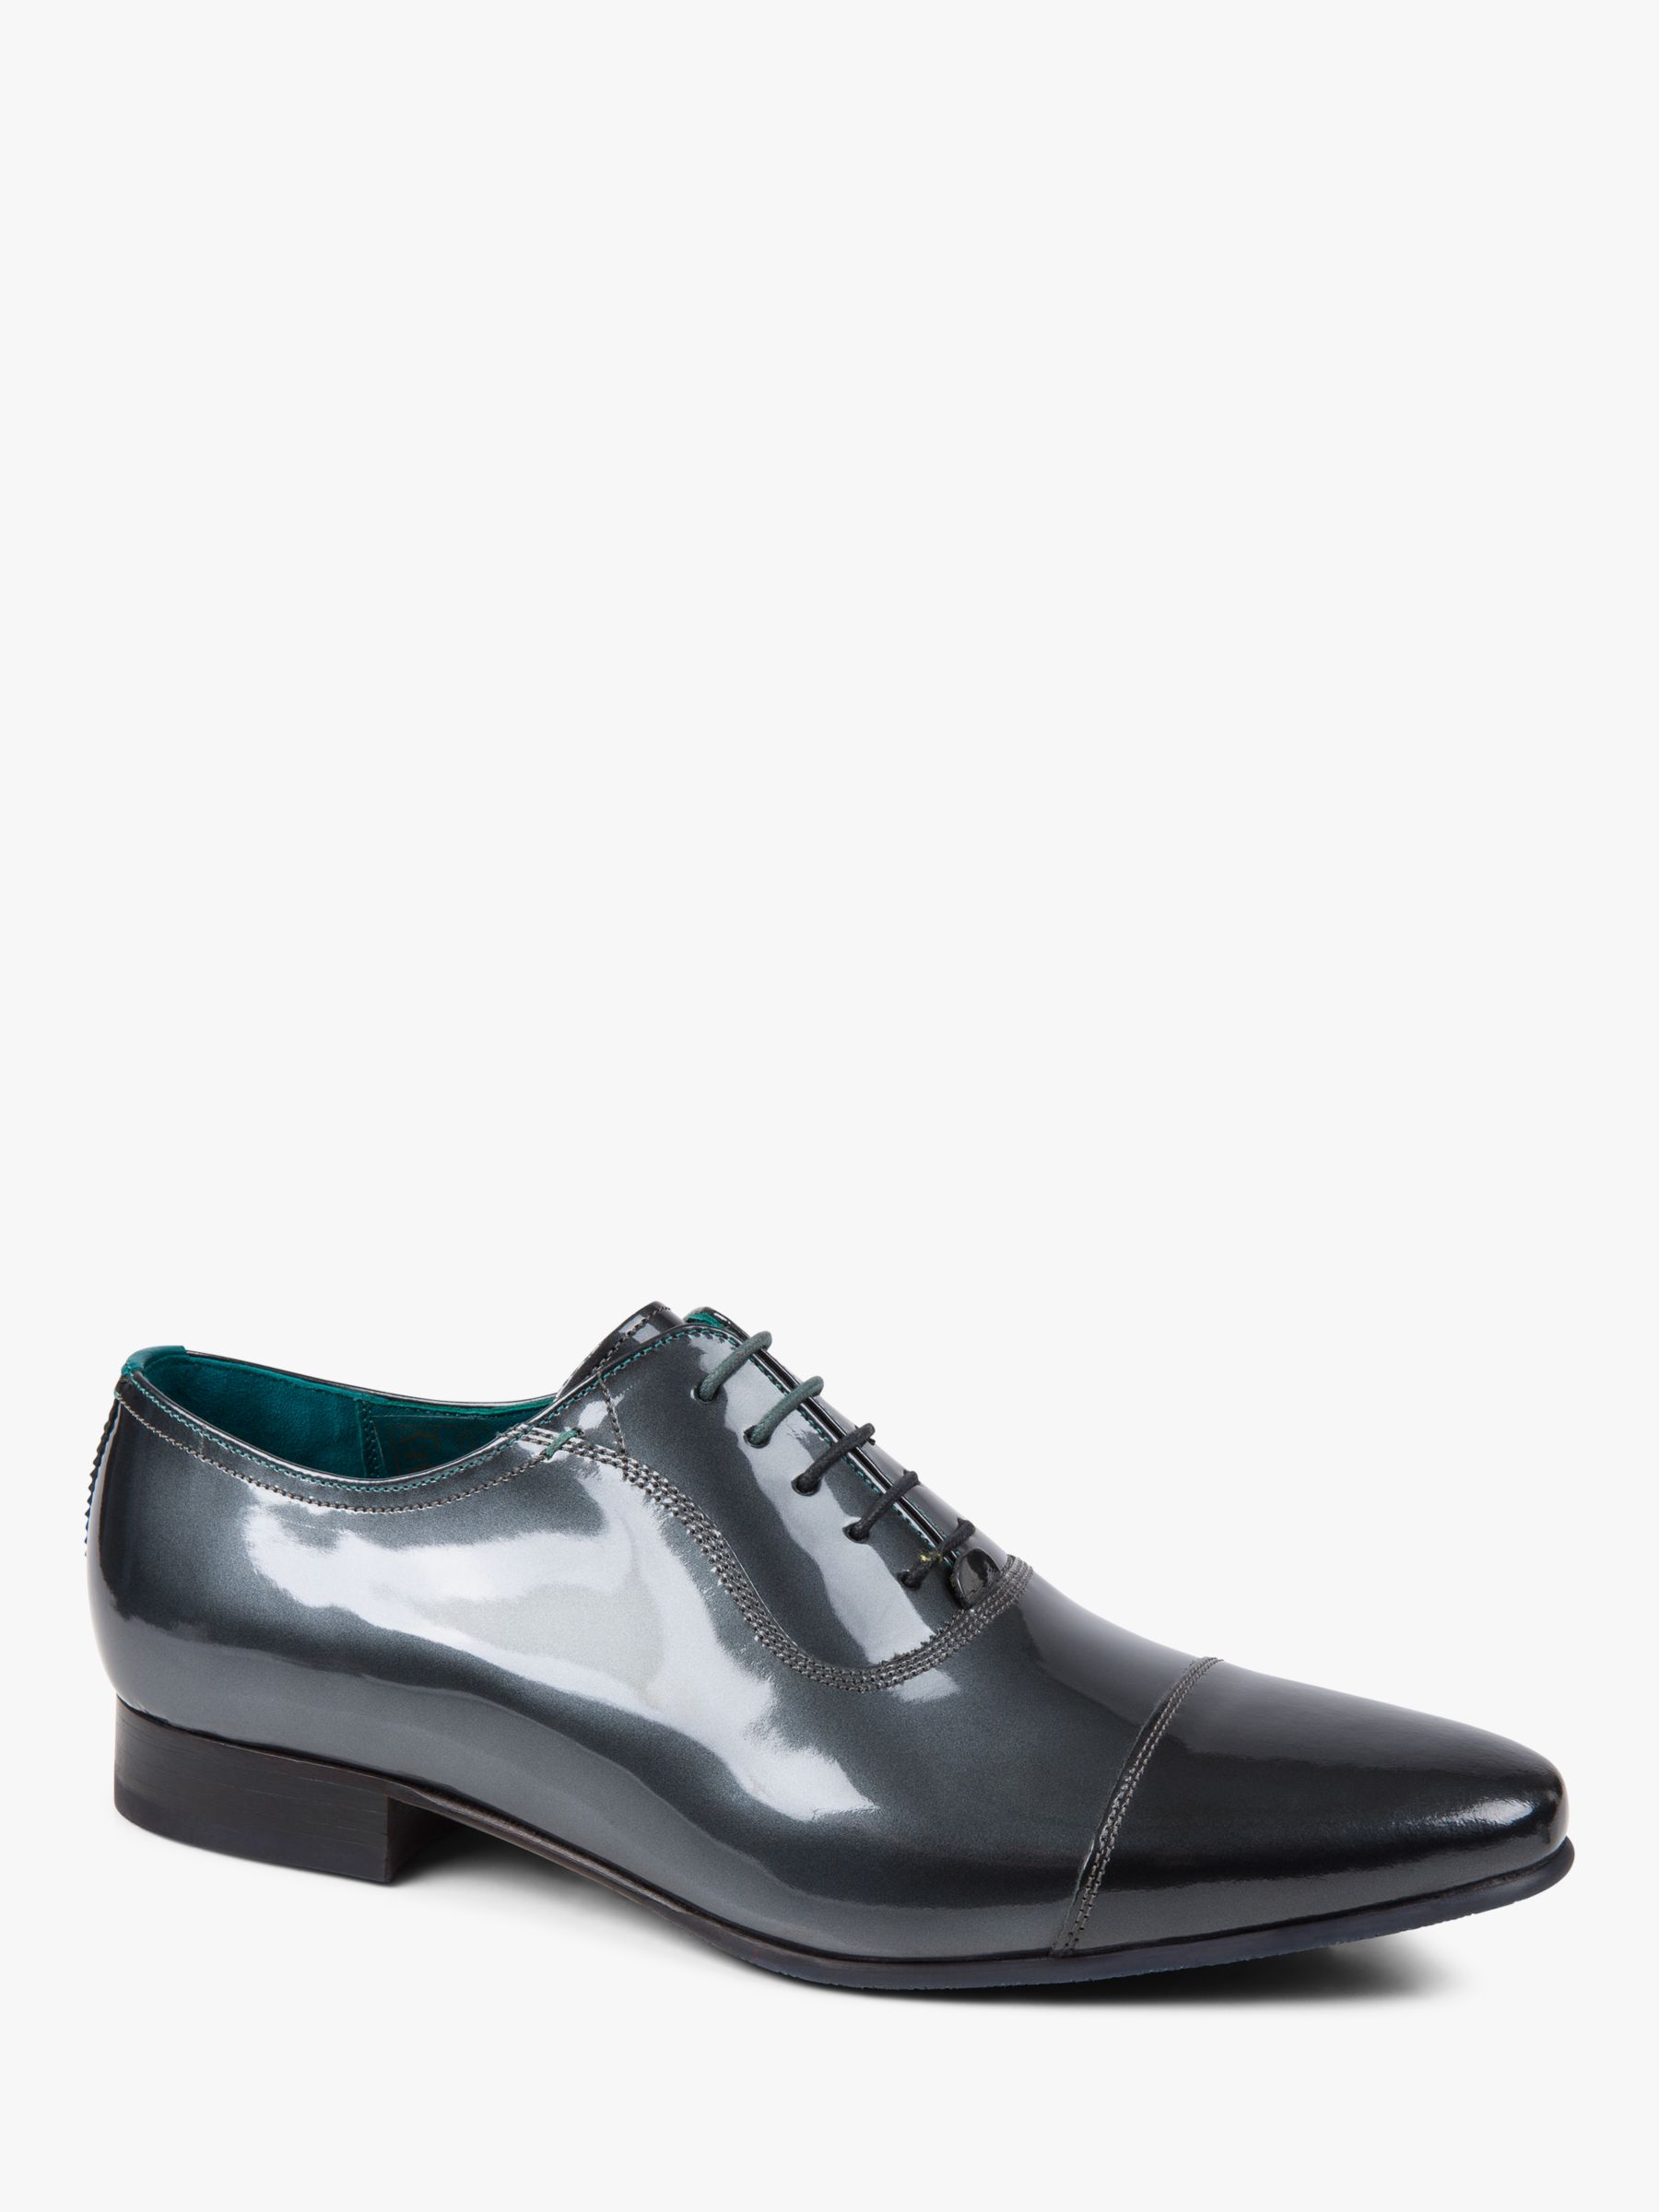 Ted Baker Sharney Patent Oxford Shoes